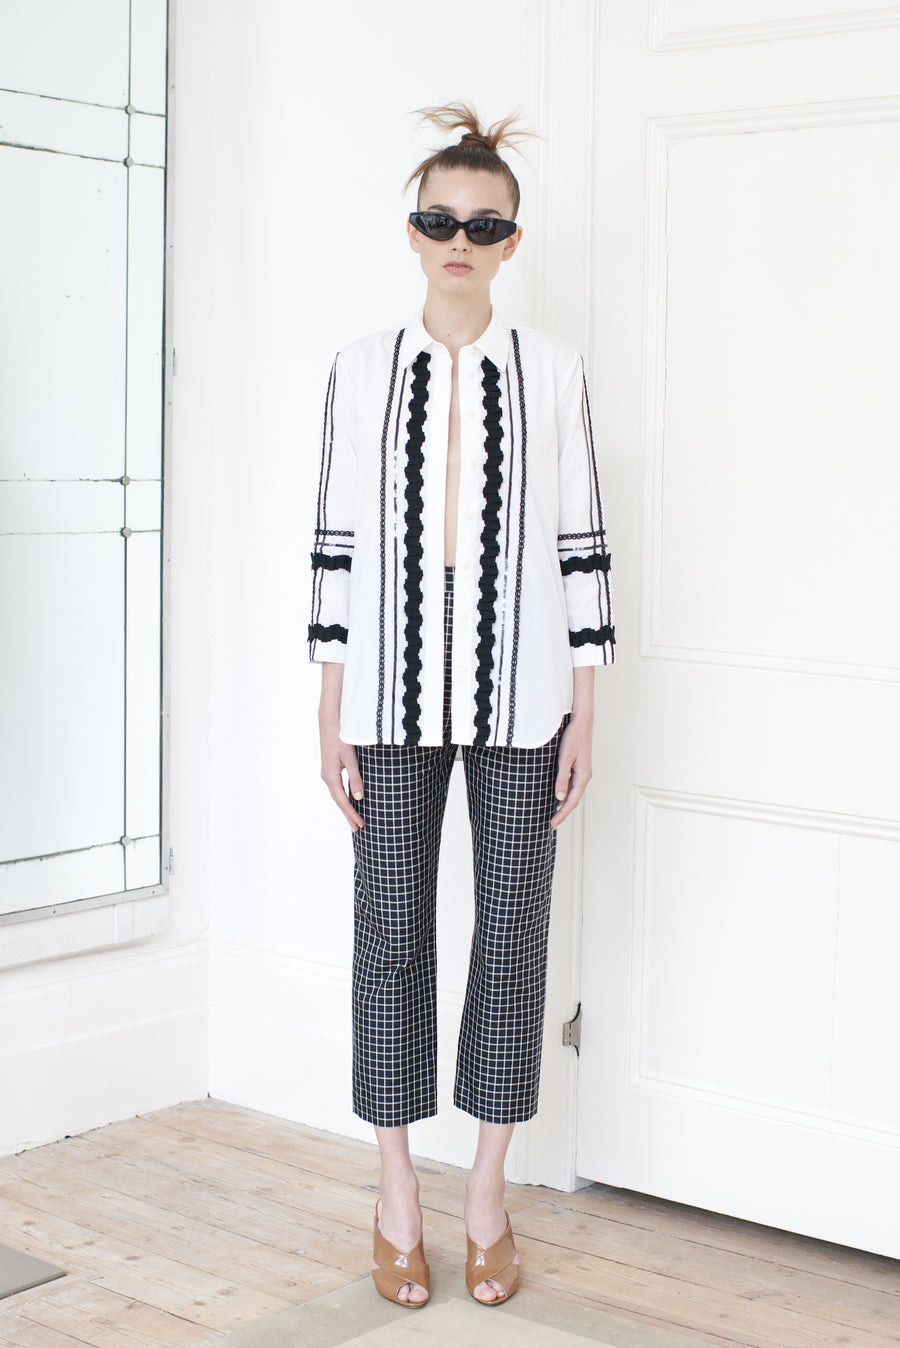 SS2016 / Look 8